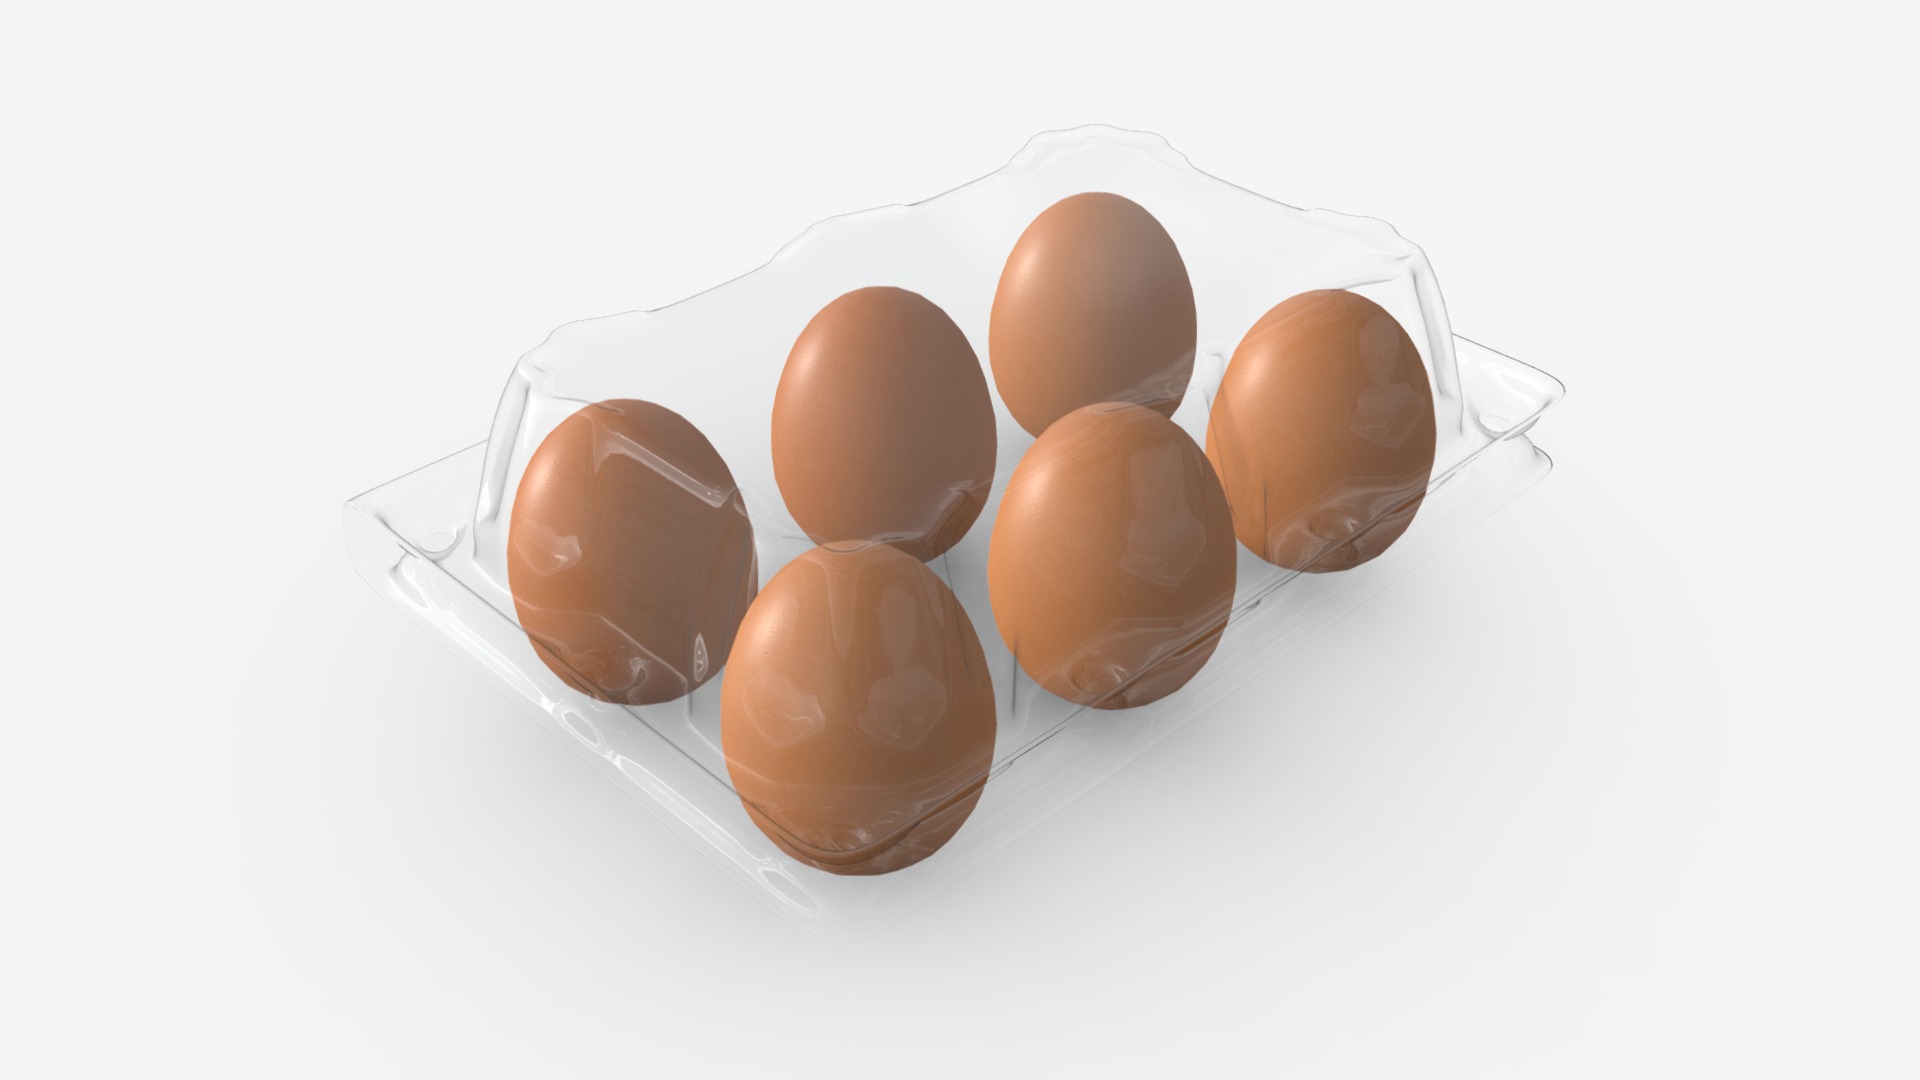 3D model Eggs in plastic package 6 eggs - This is a 3D model of the Eggs in plastic package 6 eggs. The 3D model is about a group of brown eggs.